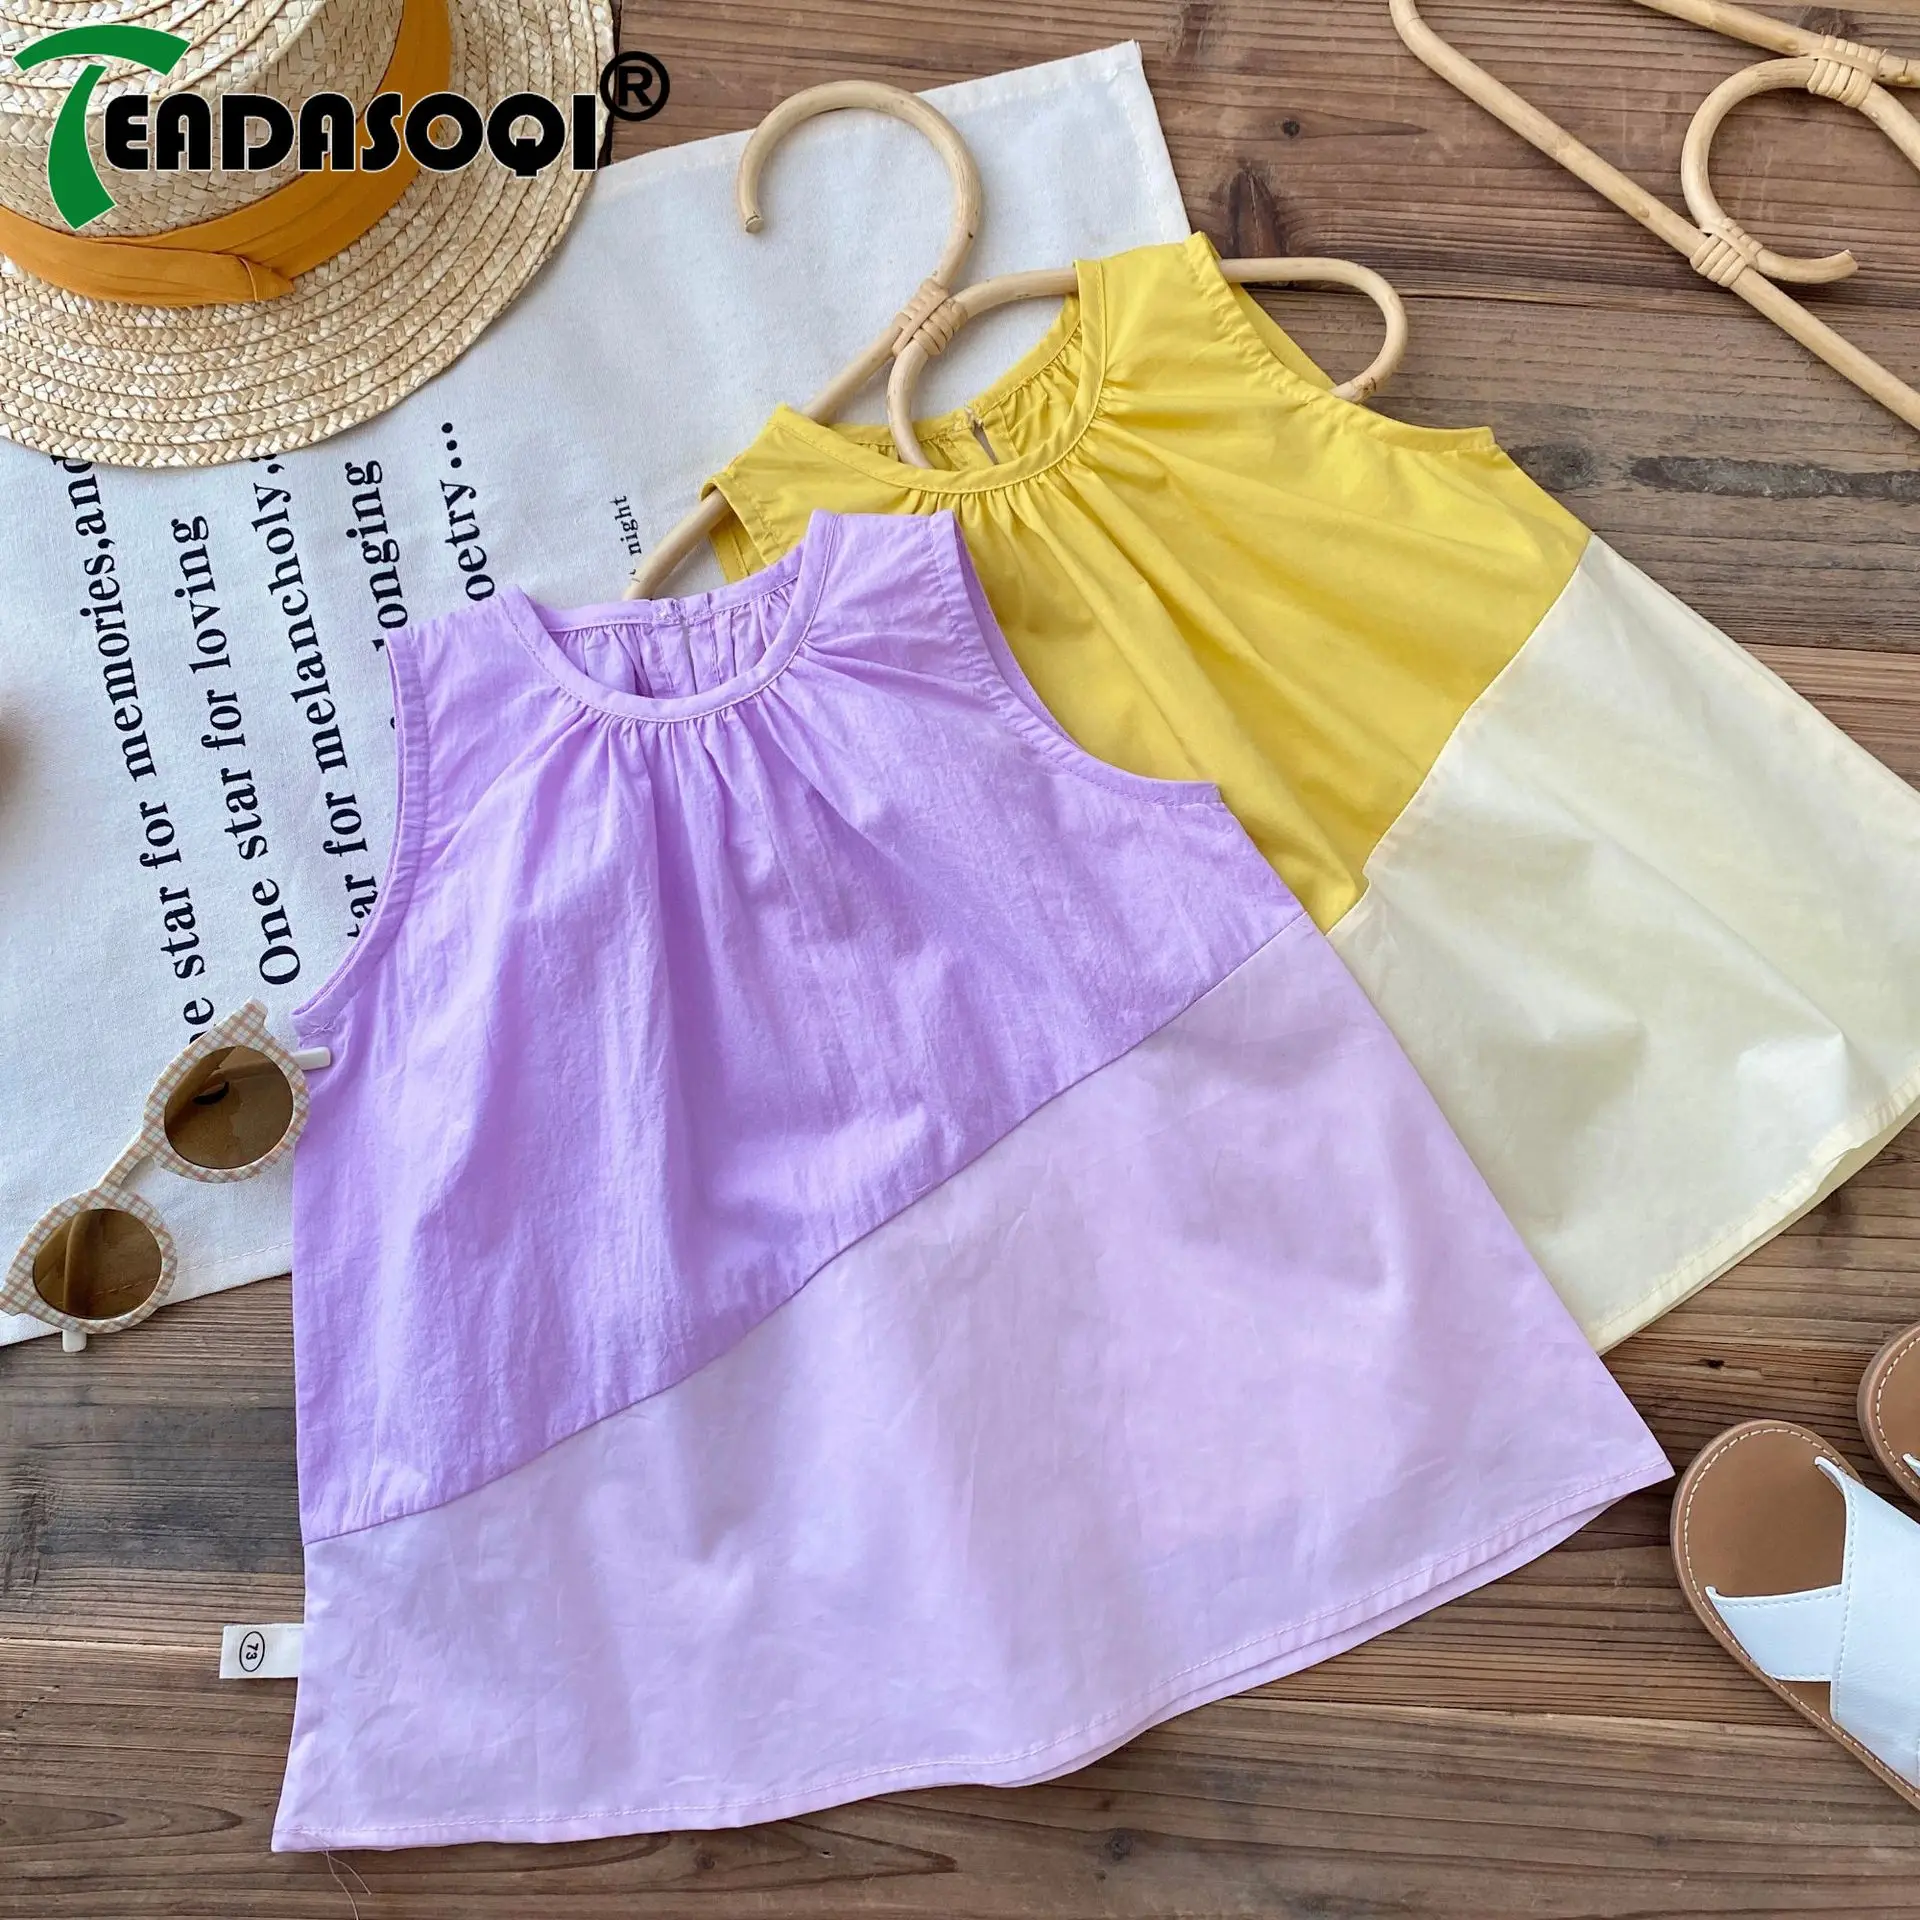 

2023 New In Fashion Clothes 3M-6Y Kids Baby Girls Sleeveless Patchwork Knee-length Dresses Toddler Children 98% Cotton